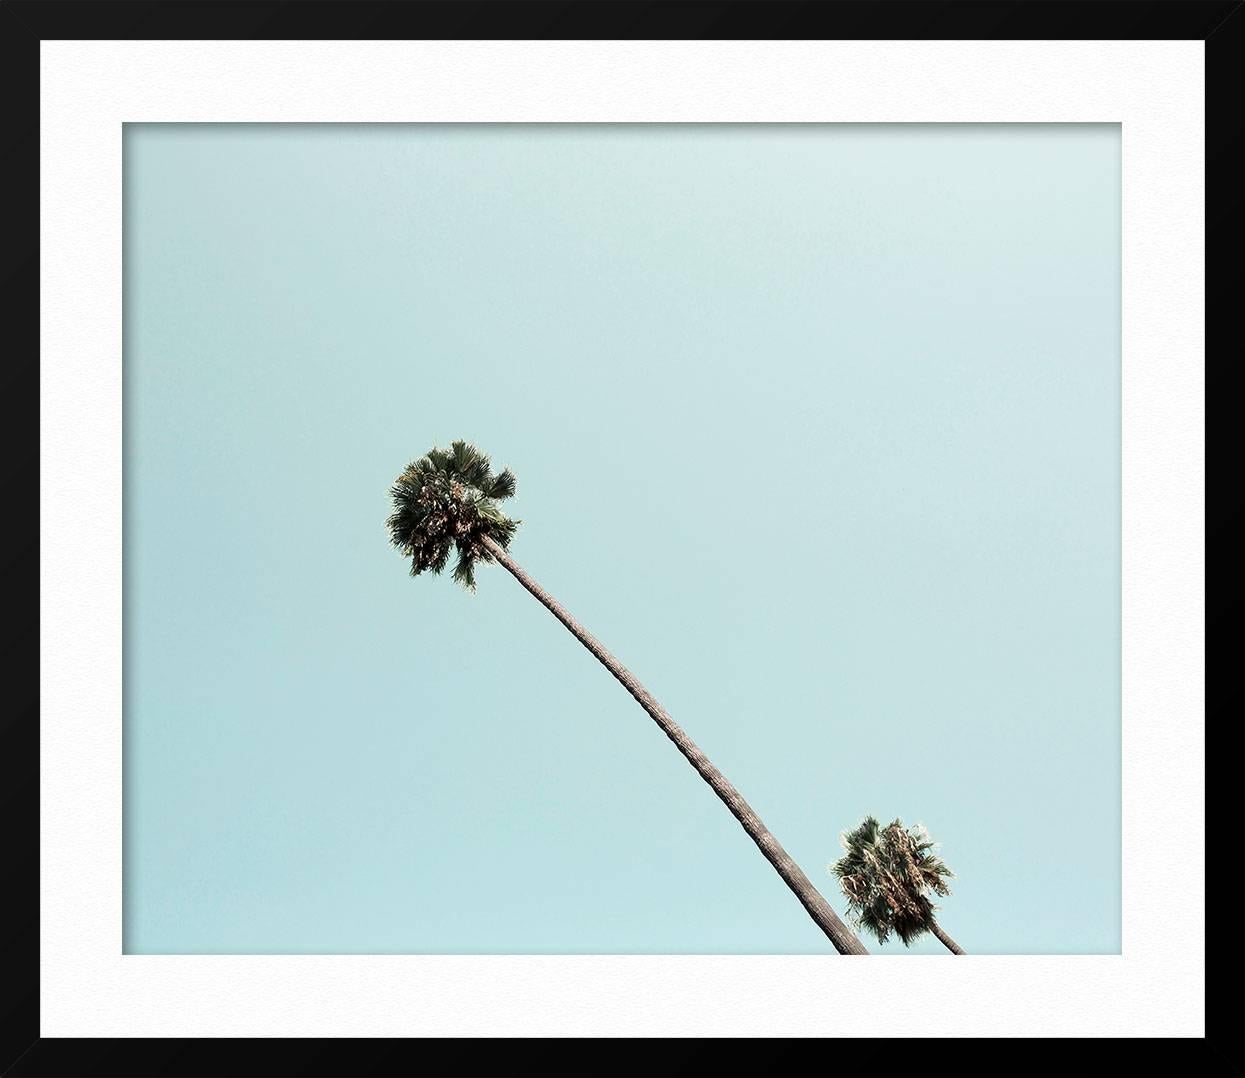 ABOUT THIS PIECE: Photographer Ludwig Favre shot Beverly Hills Palm on his last trip to Los Angeles, California. He is know for a soft, often pastel palette and interesting cropping choices. Our curators recommend this work large format and with a